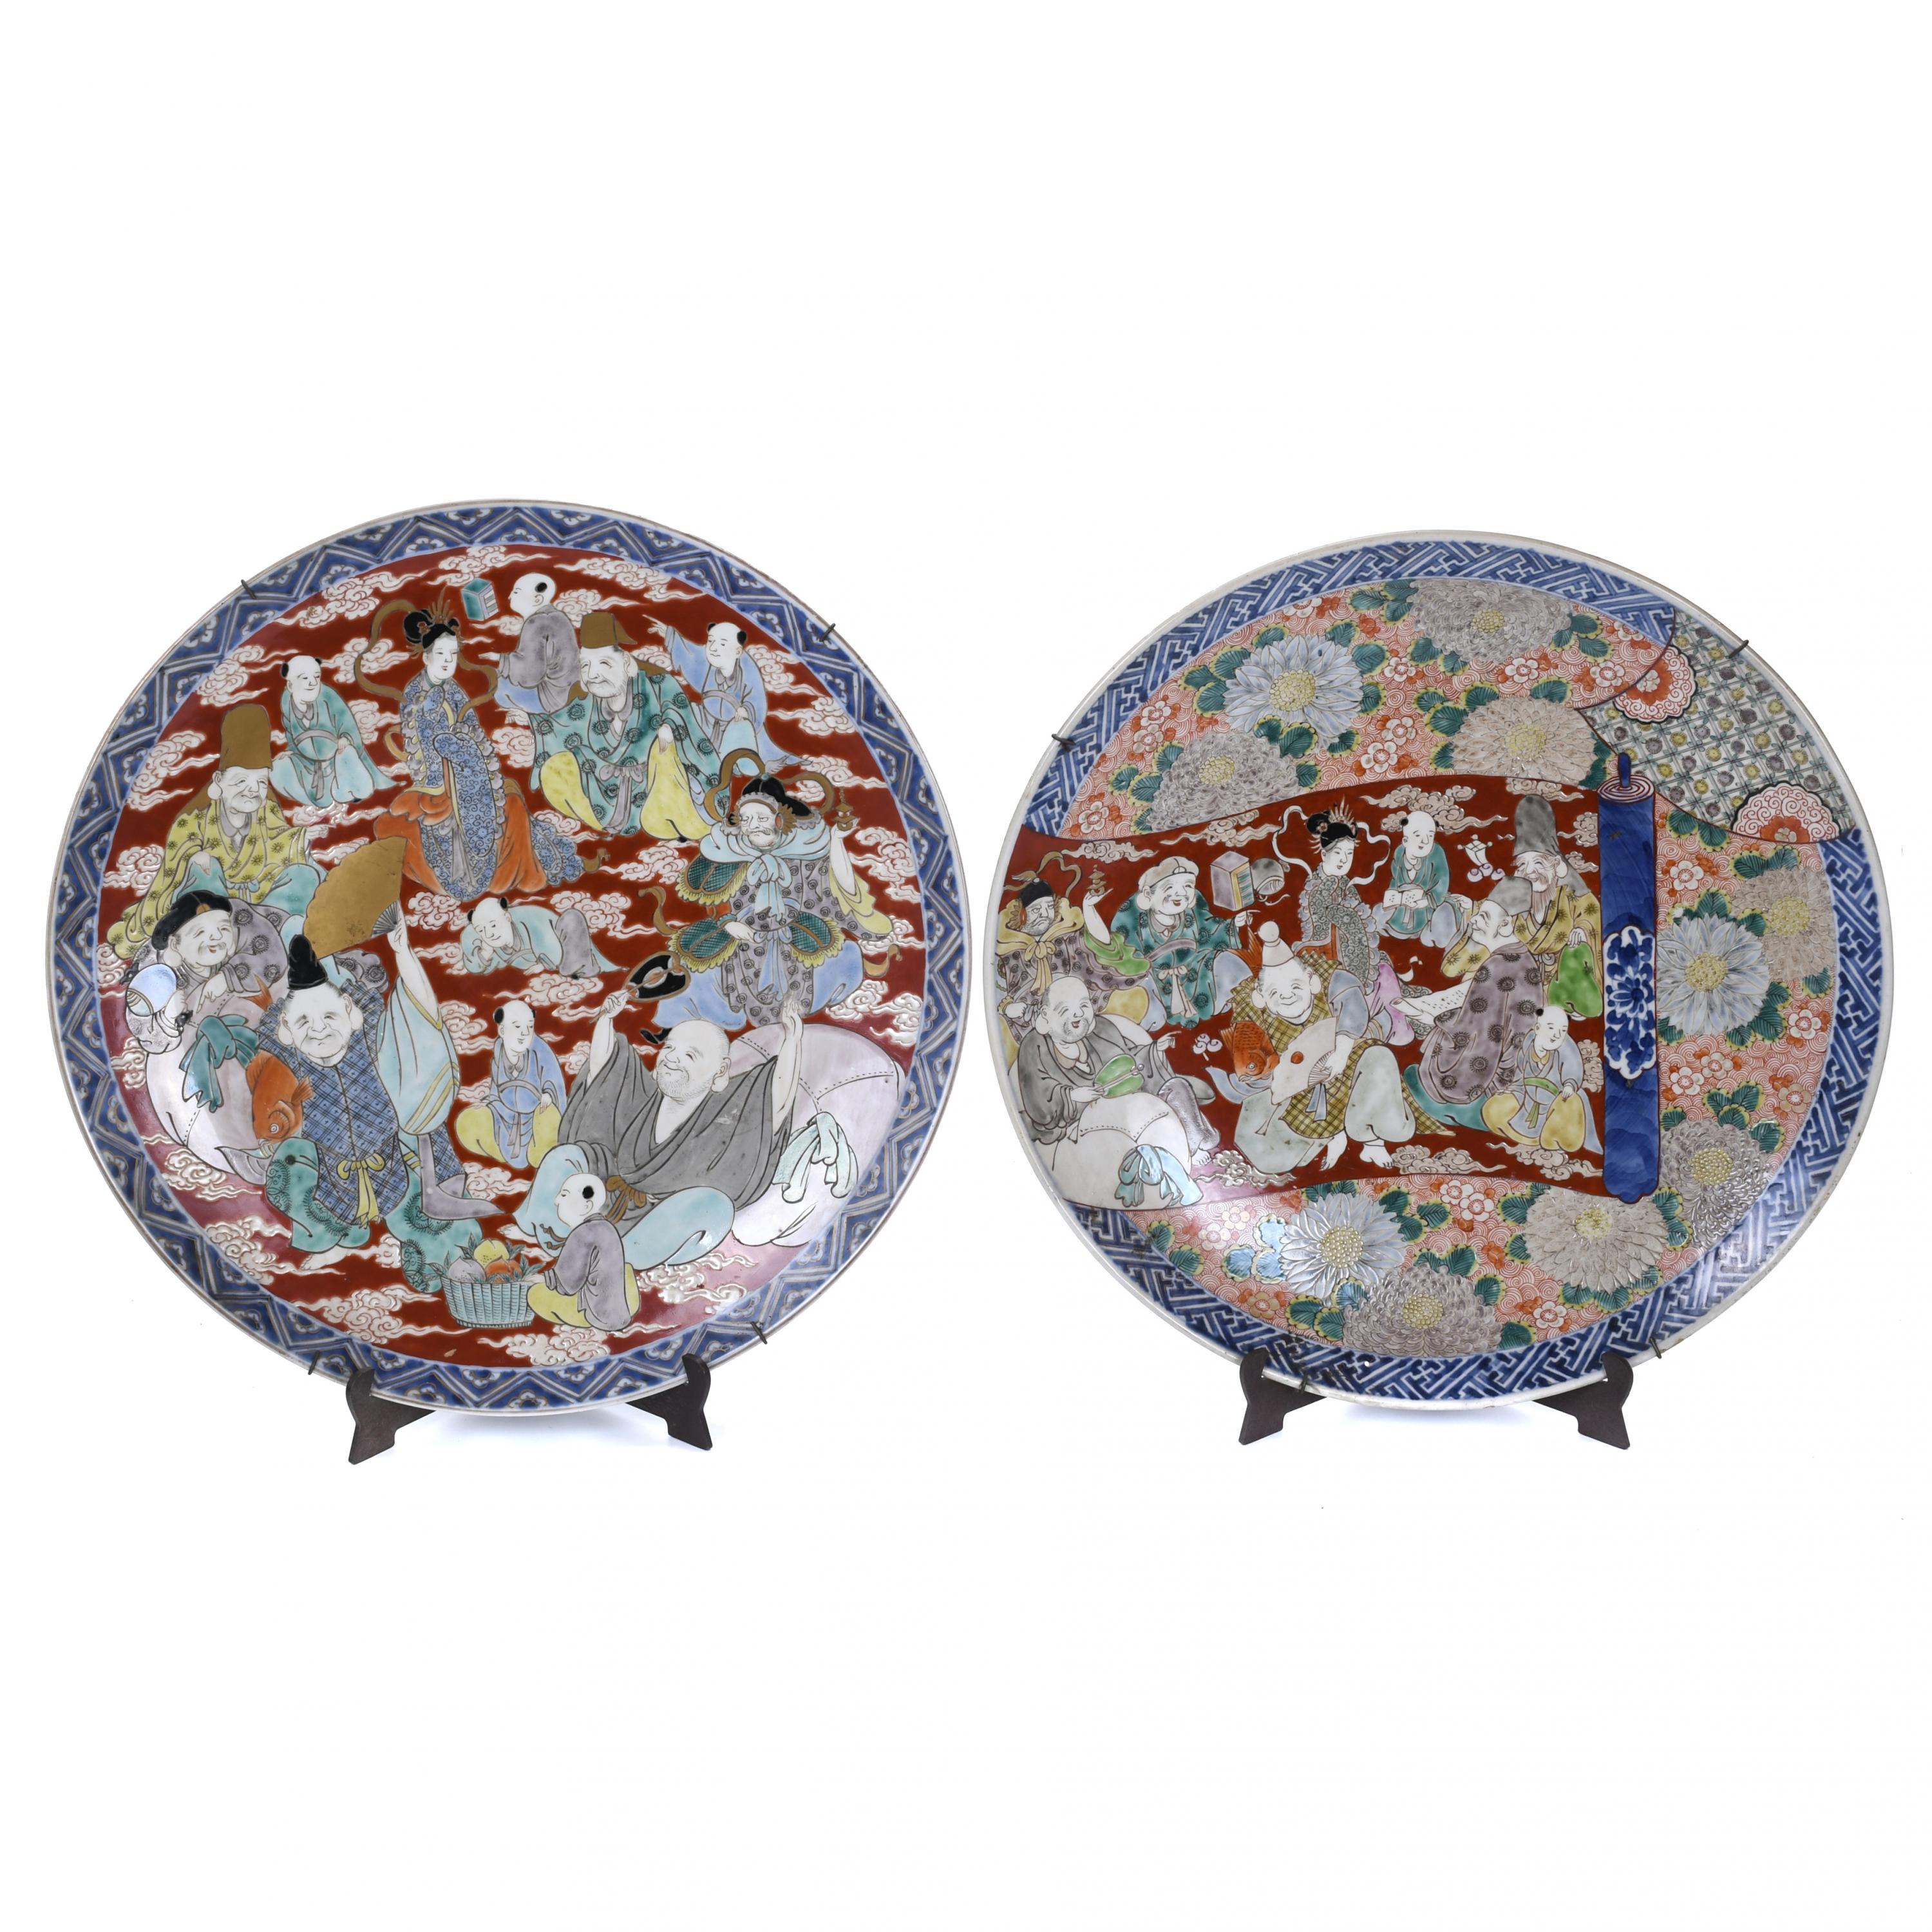 PAIR OF CHINESE DISHES, 20TH CENTURY.